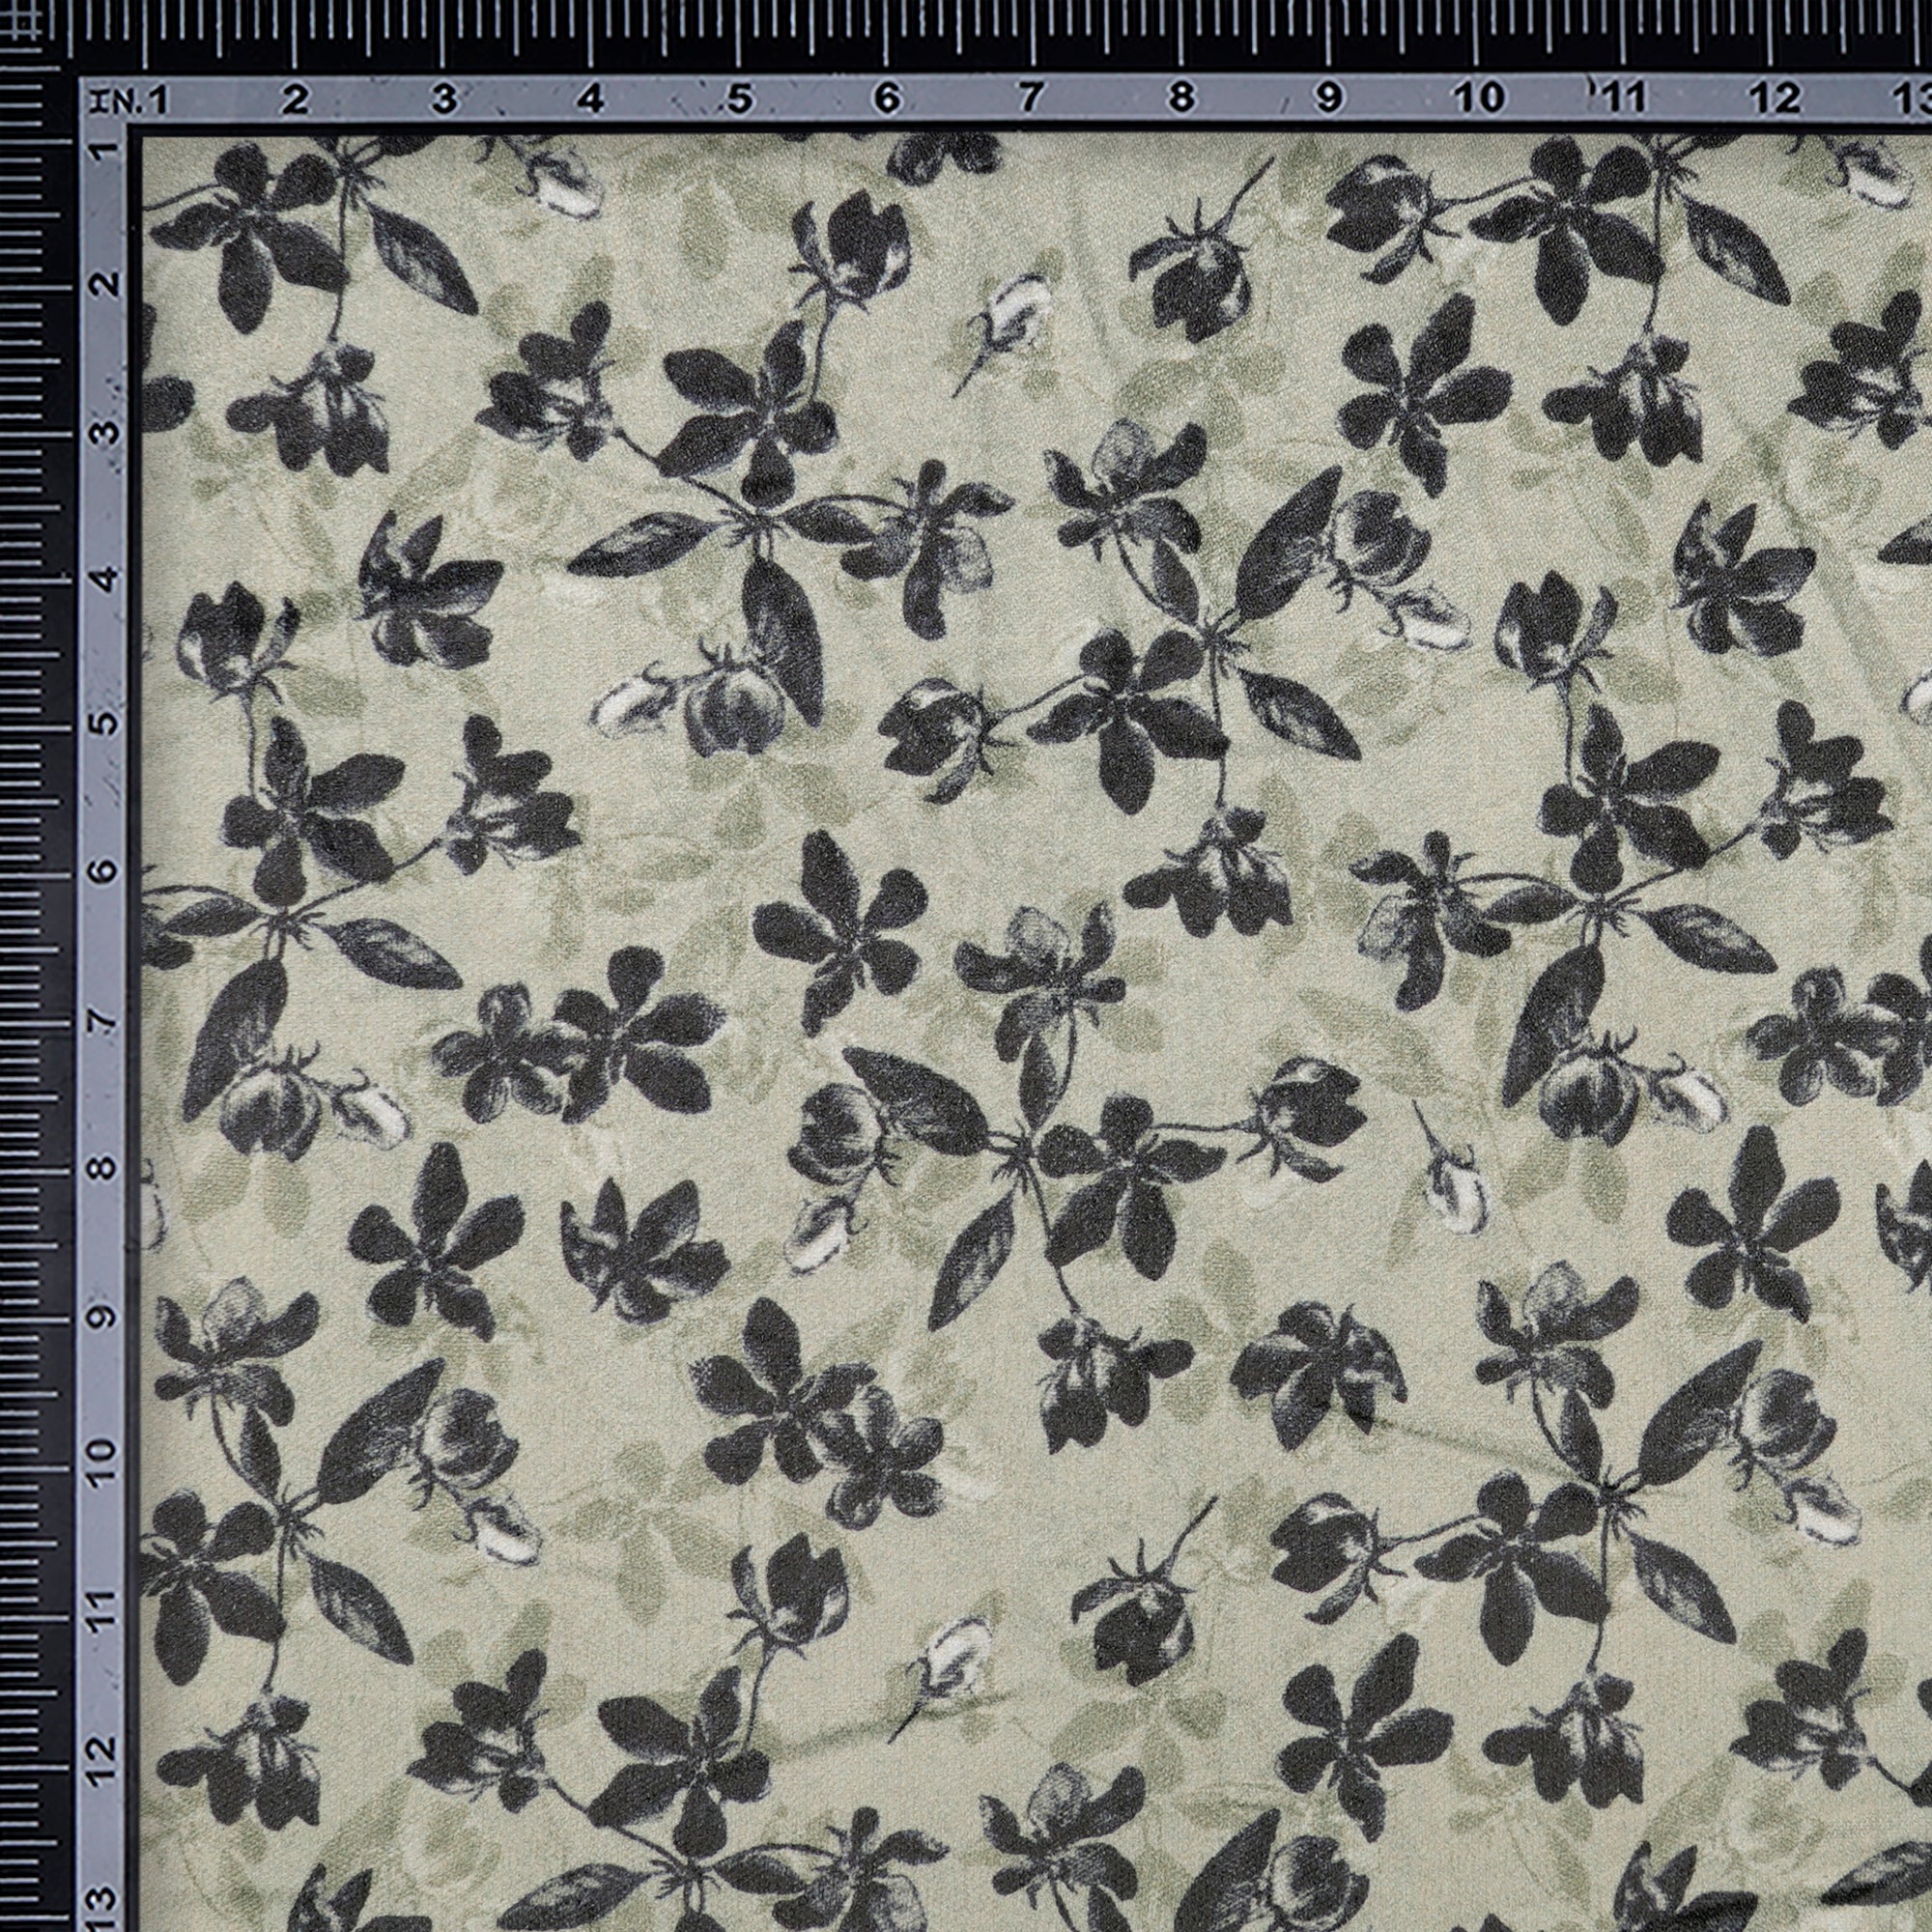 Green Tint Floral Pattern Digital Printed Imported Polyester Velvet Fabric (44" Width)